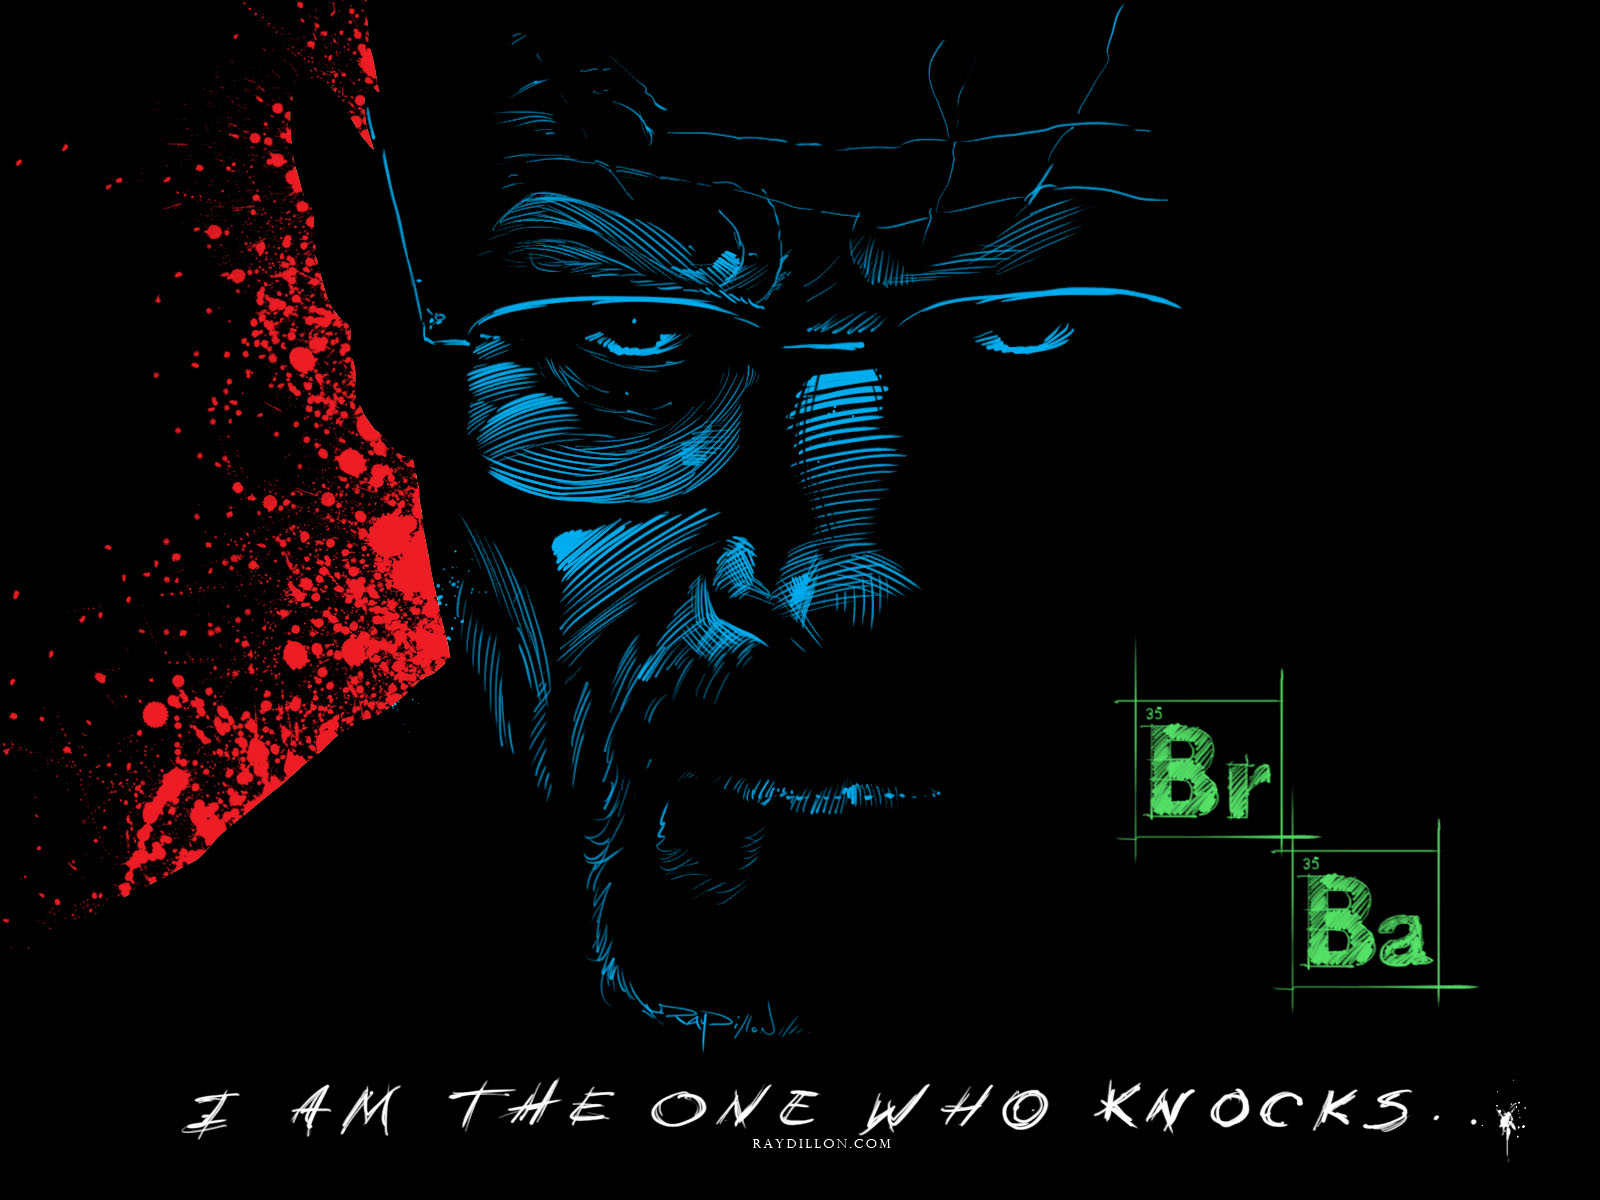 Free Download Breaking Bad Wallpaper Hd 1920x1080 For - vrogue.co